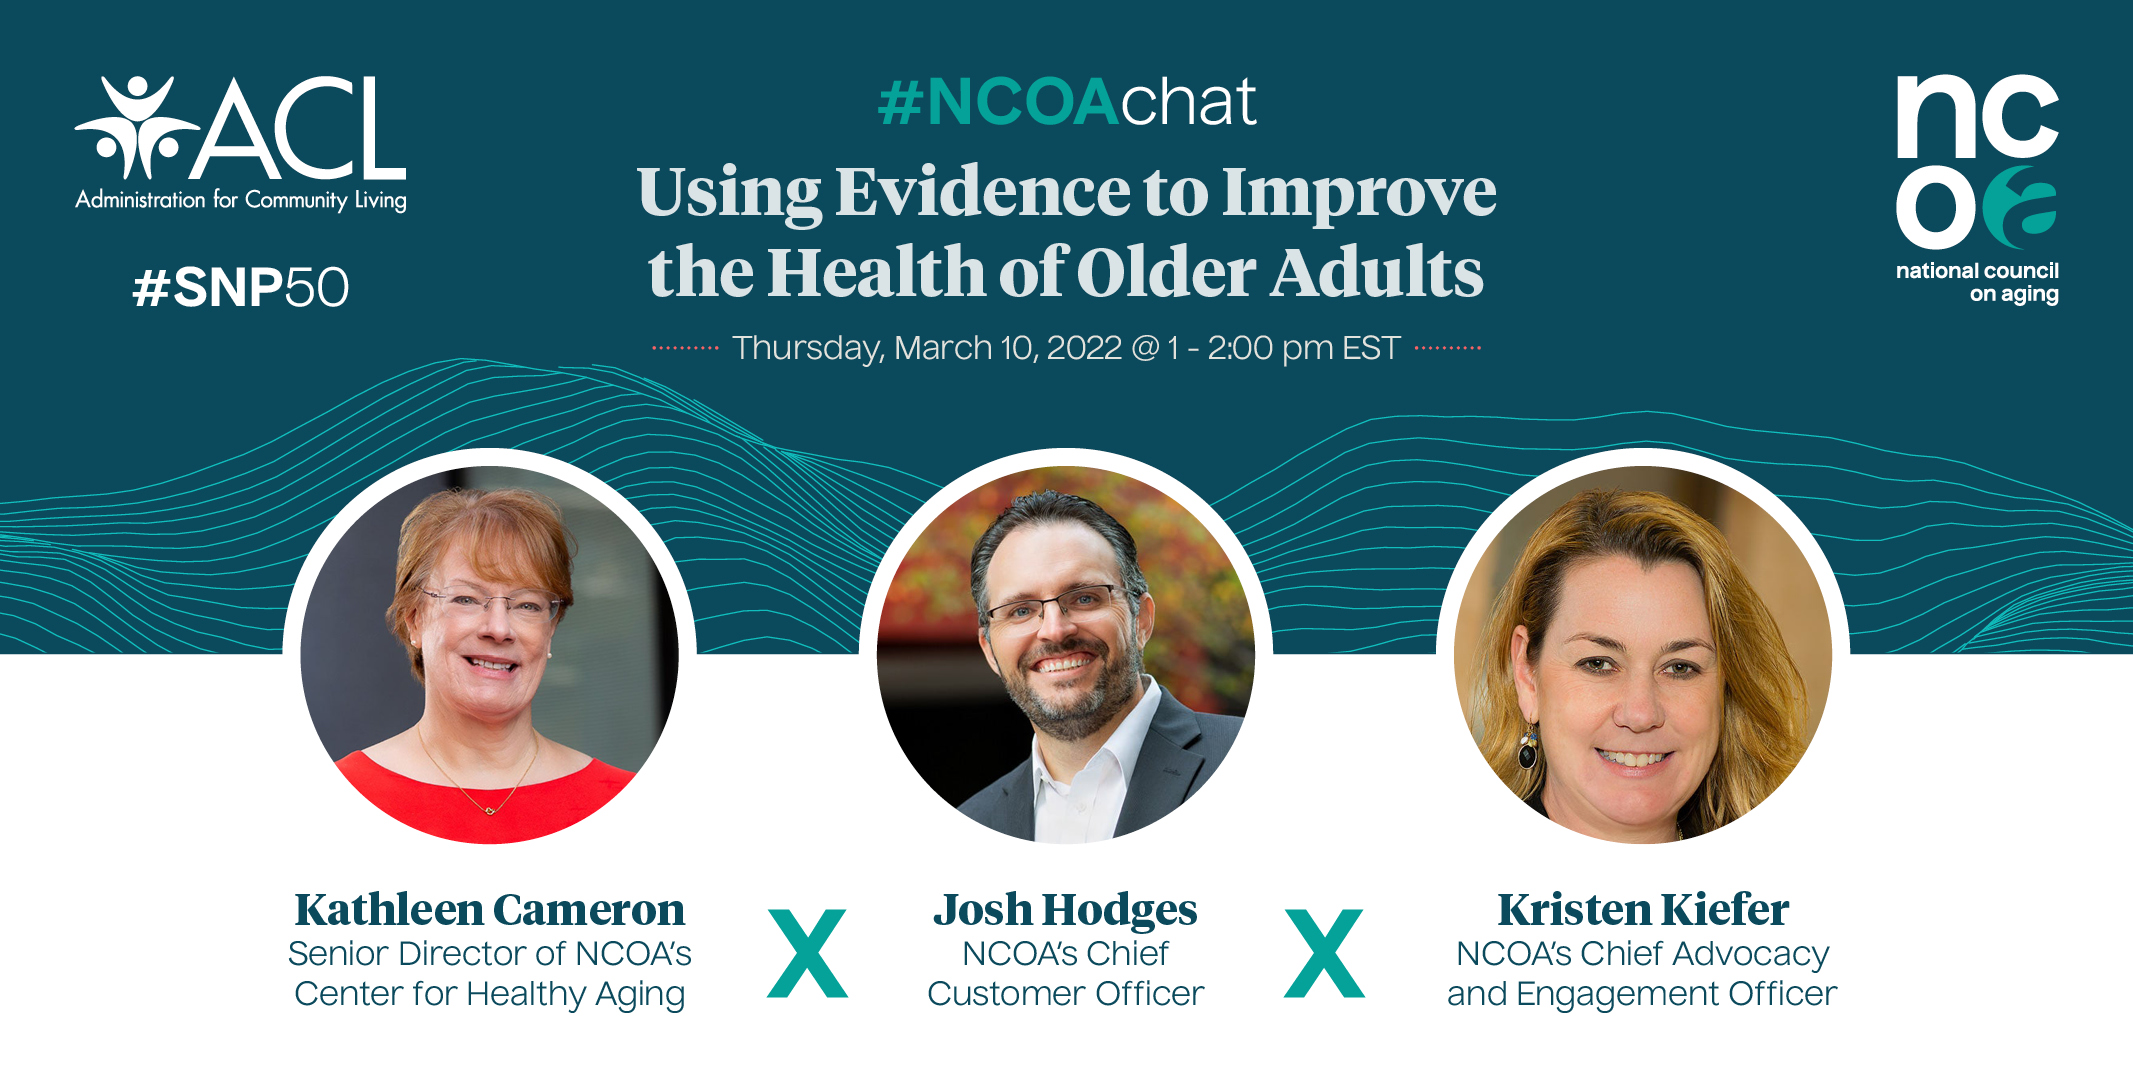 #NCOAchat Using Evidence to Improve the Health of Older Adults. Thursday, March 10, 2022 @ 1-2:00 PM EST. Kathleen Cameron, Senior Director of NCOA's Center for Healthy Aging. Josh Hodges, NCOA's Chief Customer Officer. Kristen Kiefer, NCOA's Chief Advocacy and Engagement Officer. #SNP50. ACL. NCOA.